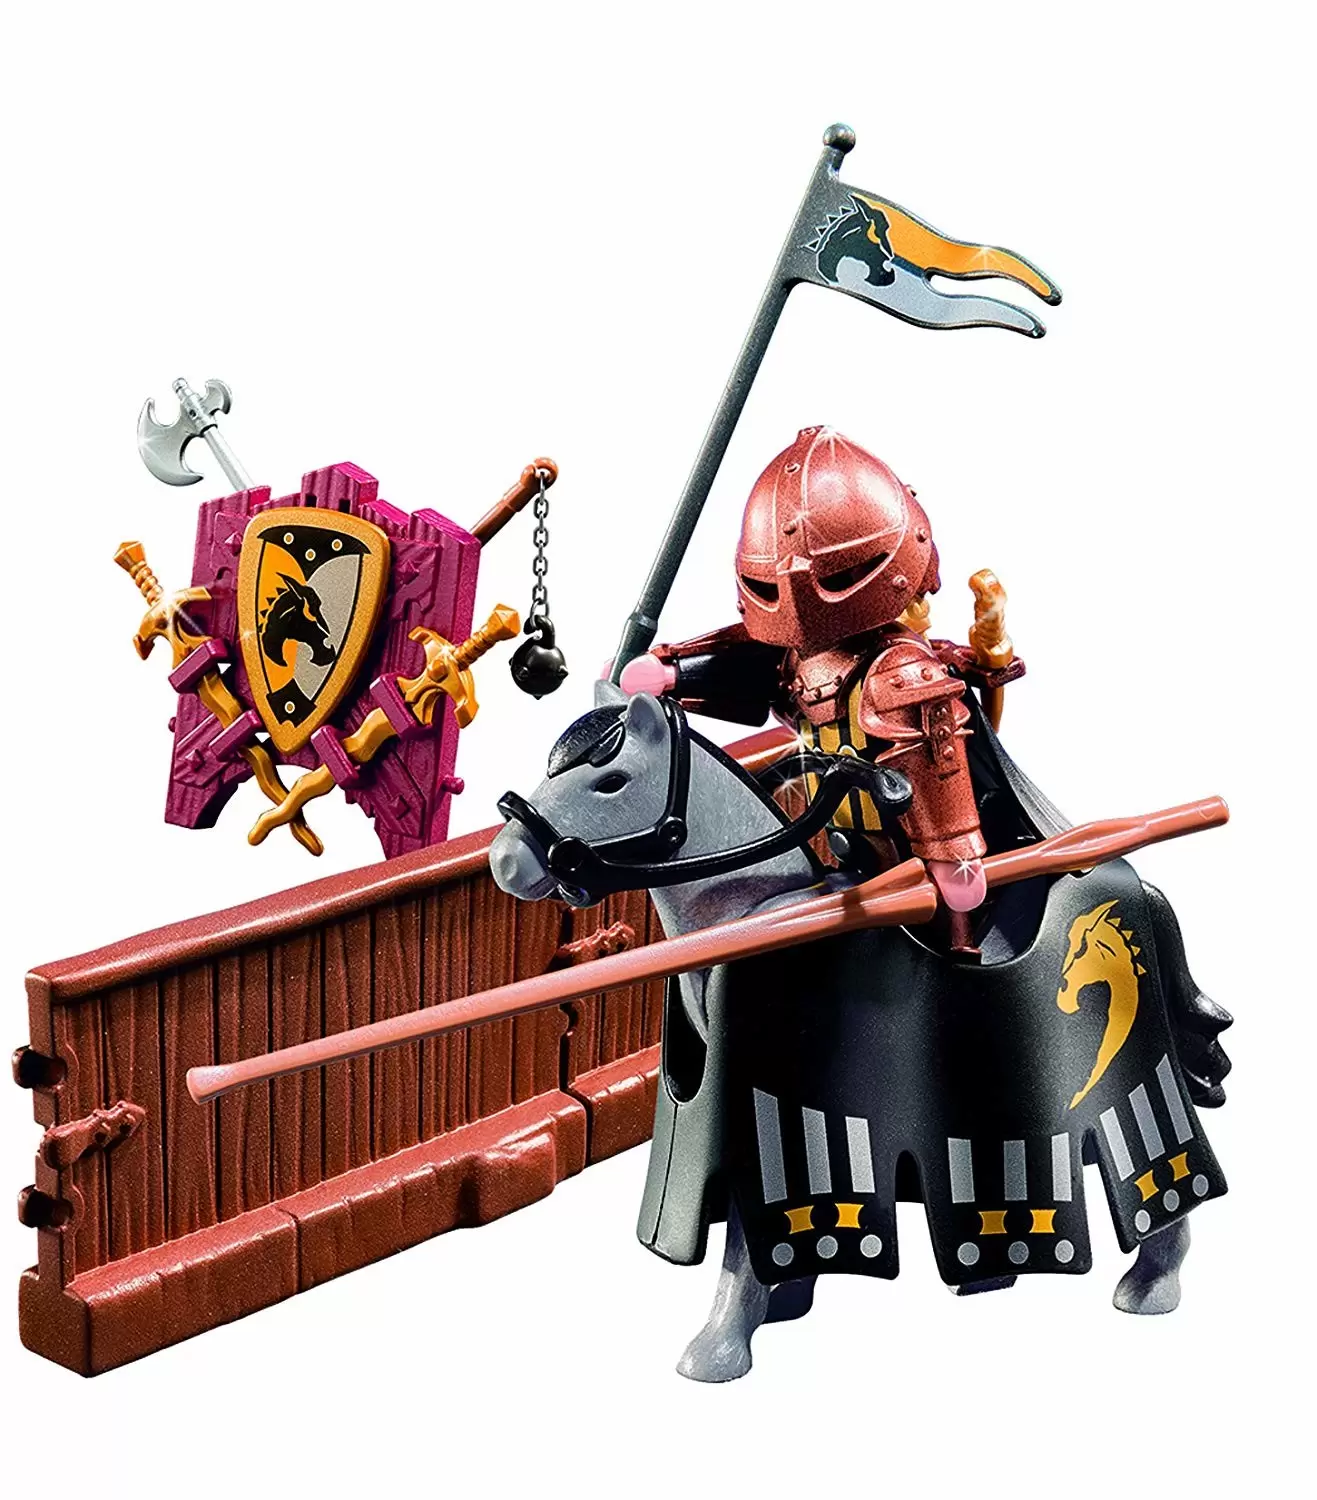 l2212 Playmobil middle ages-set of 2 clubs black or ammunition canon 4870 